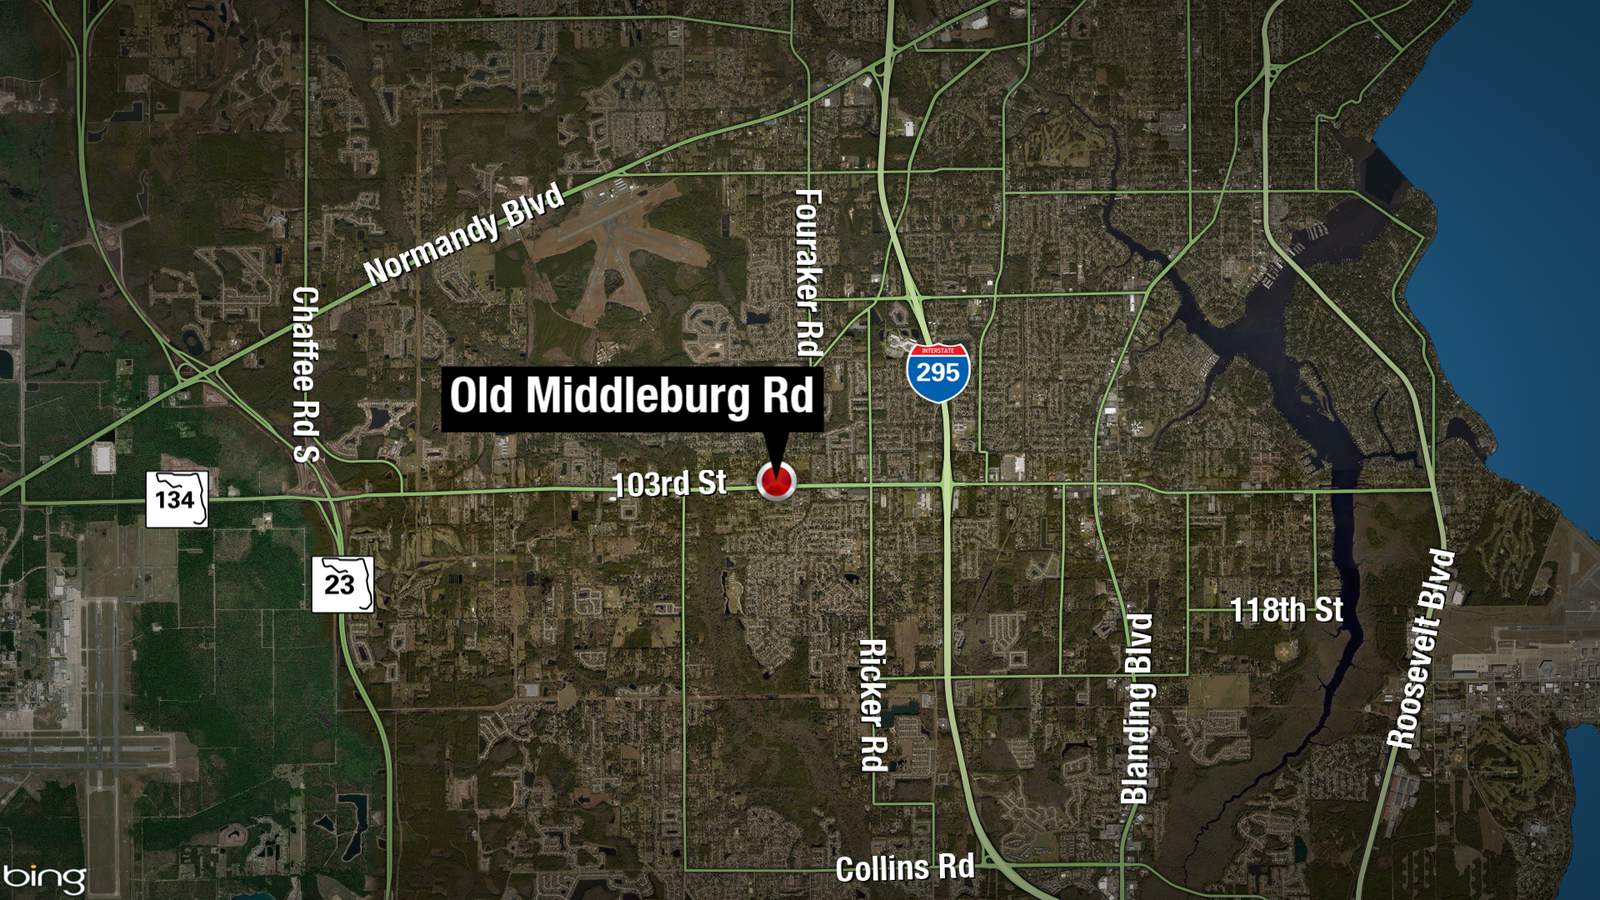 Pedestrian shot on Old Middleburg Road; JSO searching for evidence